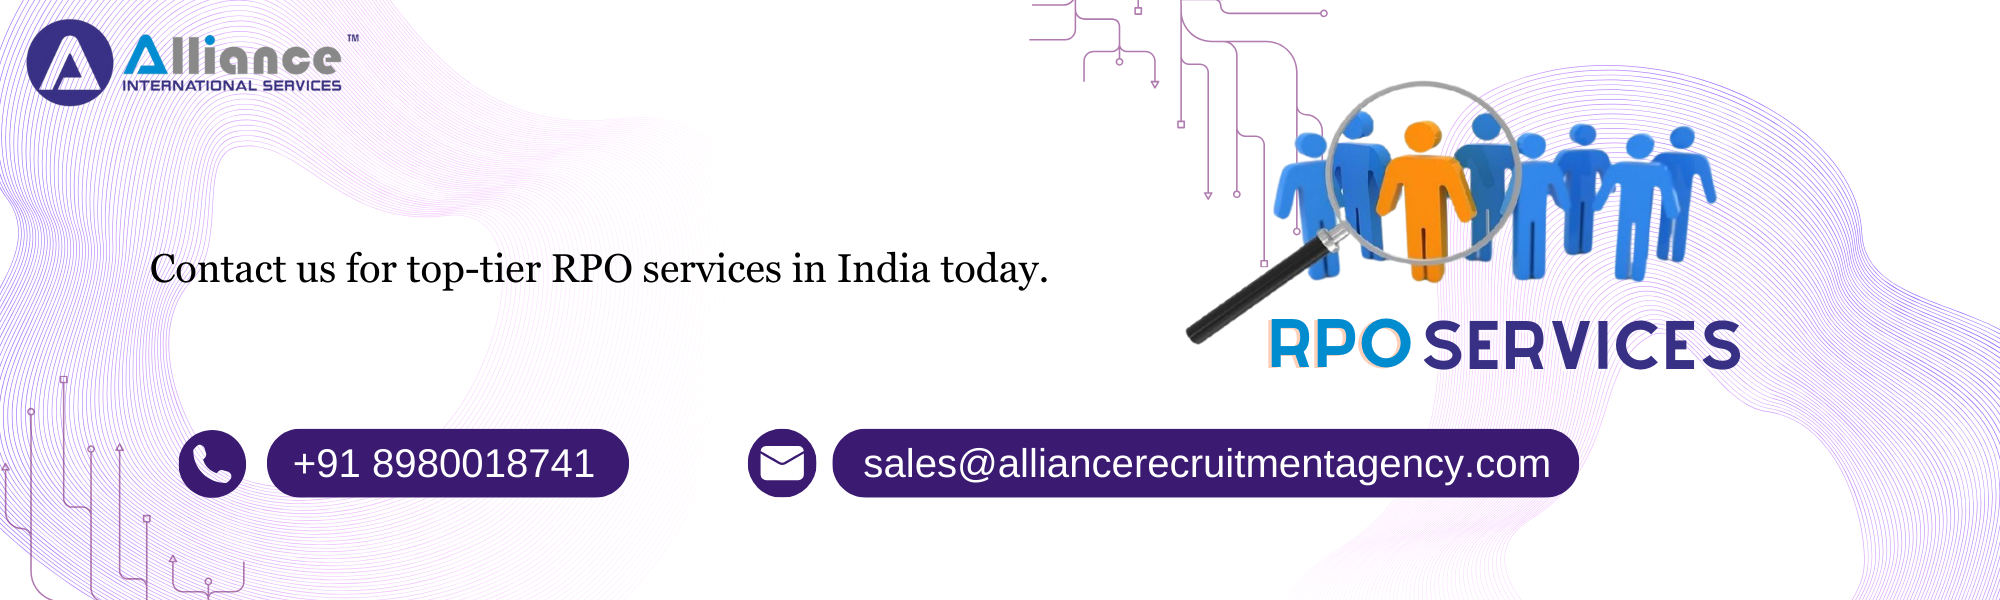 Contact us for top-tier RPO services in India today.